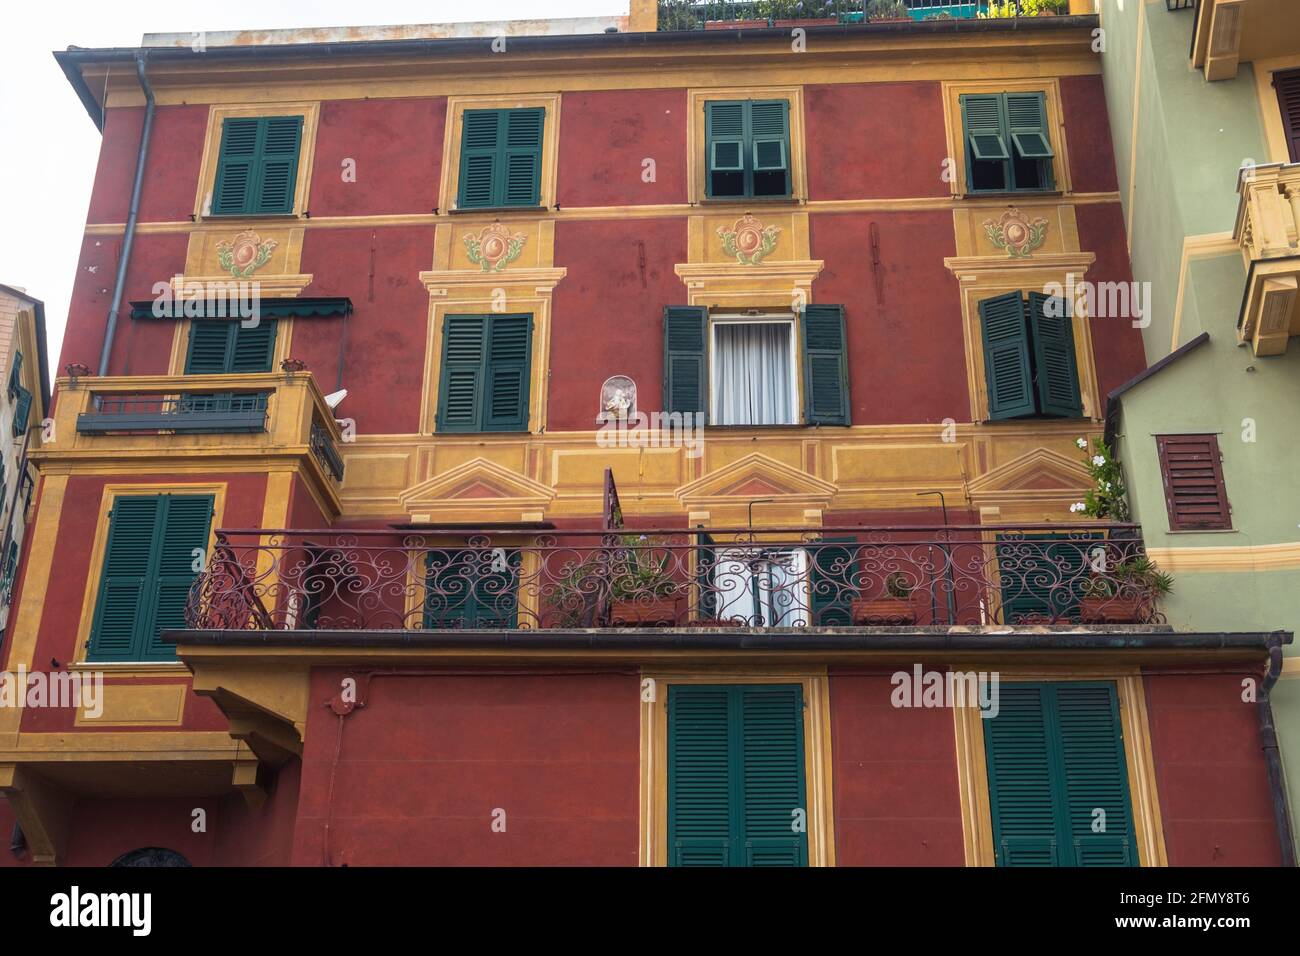 Traditionally painted front facade of an elegant building in Santa Margherita Ligure, Italy. Stock Photo